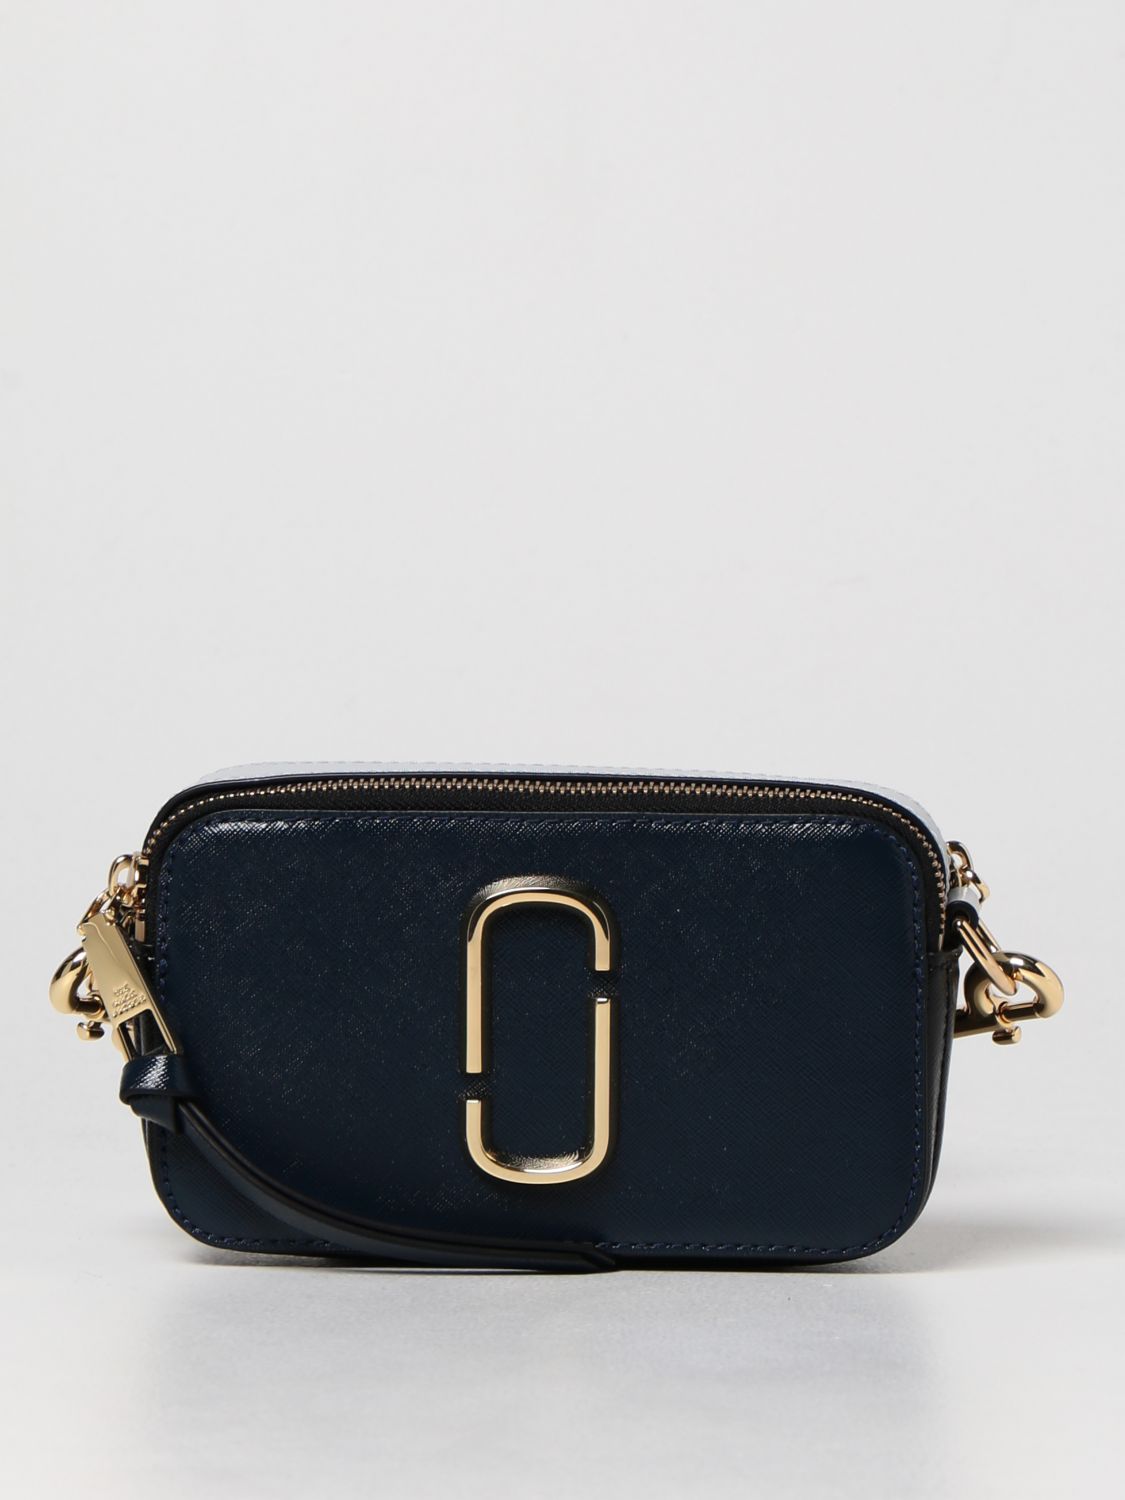 MARC JACOBS: The Snapshot Saffiano leather bag - Blue | Marc Jacobs ...